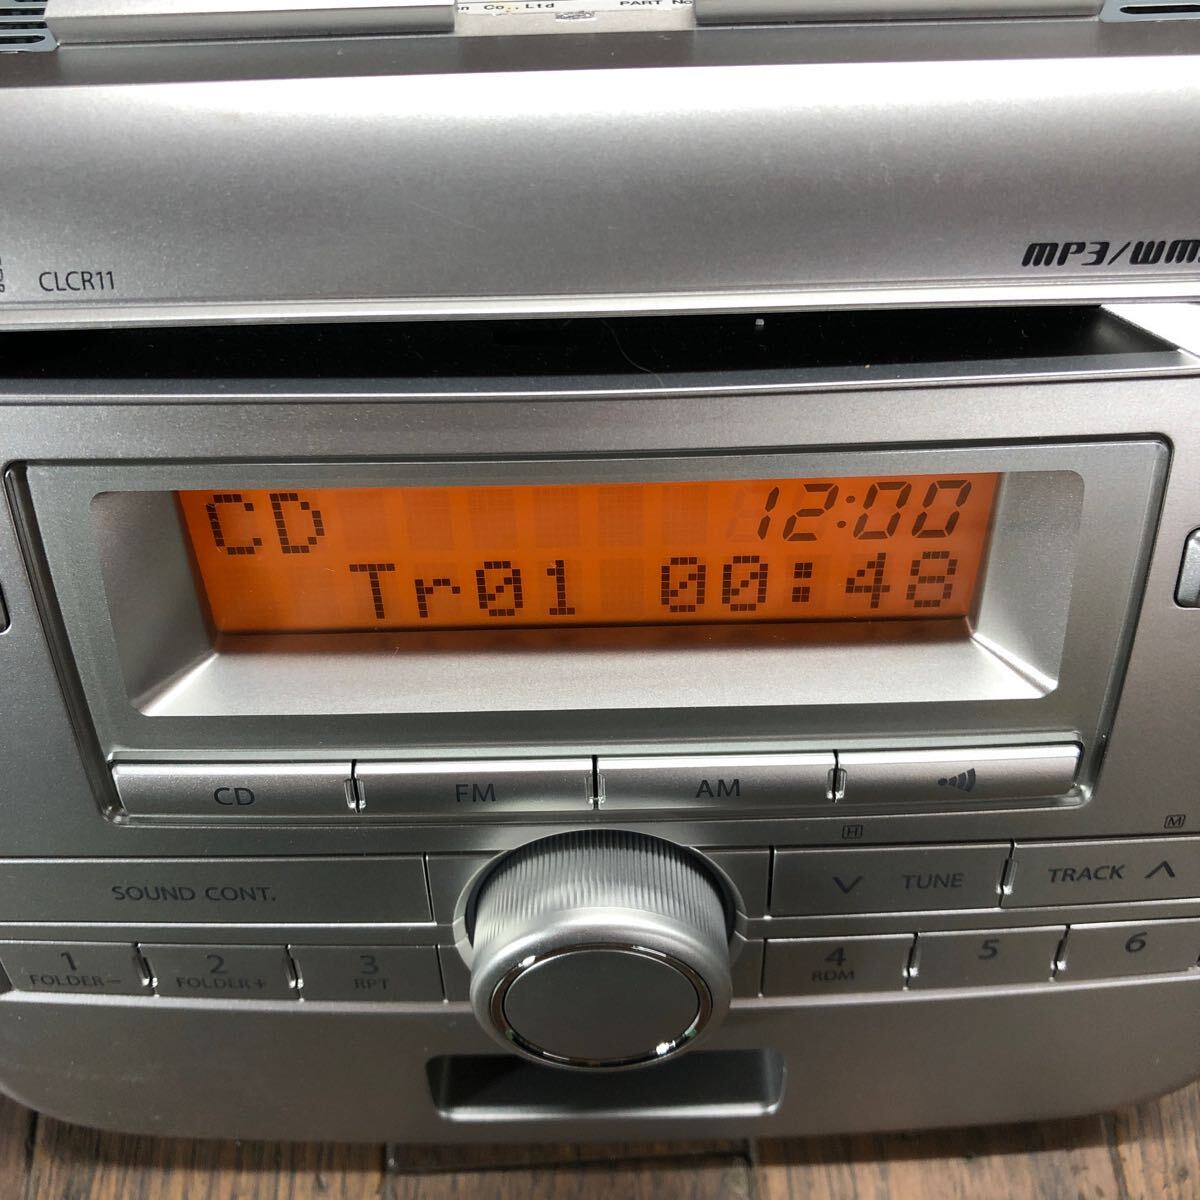 AV5-25 super-discount car stereo CD player SUZUKI clarion PS-3075J-A 39101-70K00 0028694 CD FM/AM body only simple operation verification ending used present condition goods 